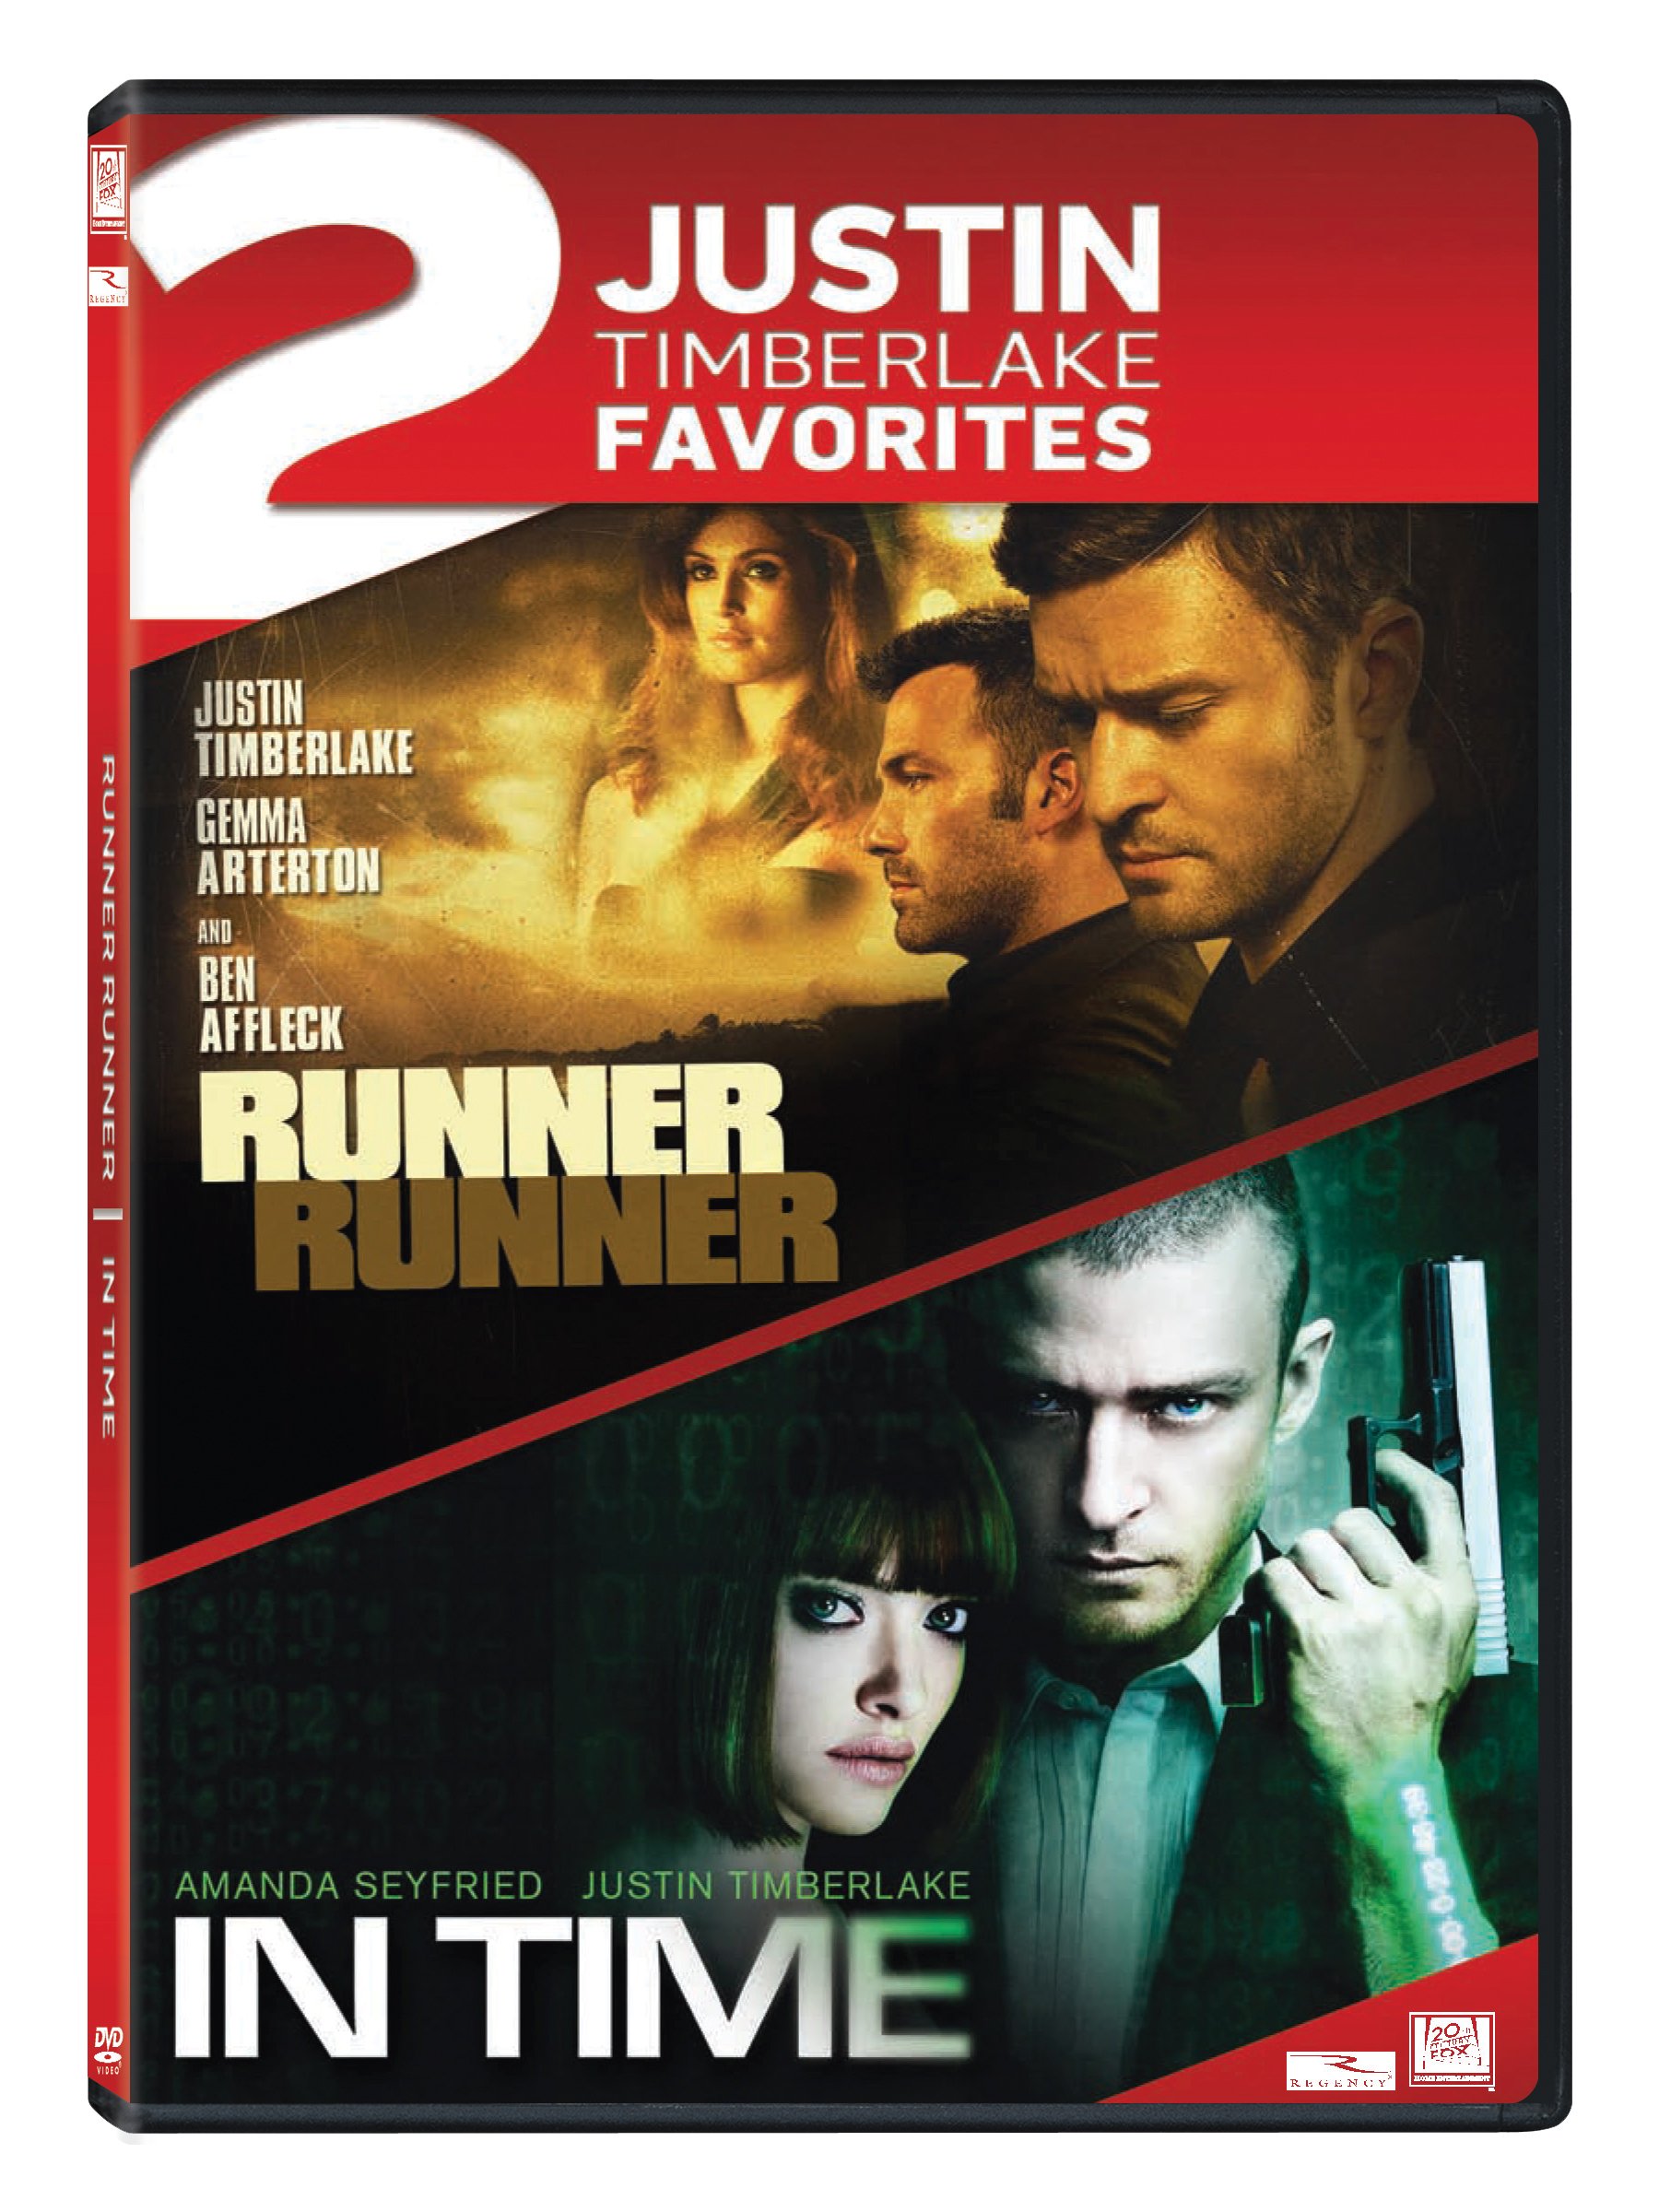 justin-timberlake-2-movies-collection-runner-runner-in-time-movie-p